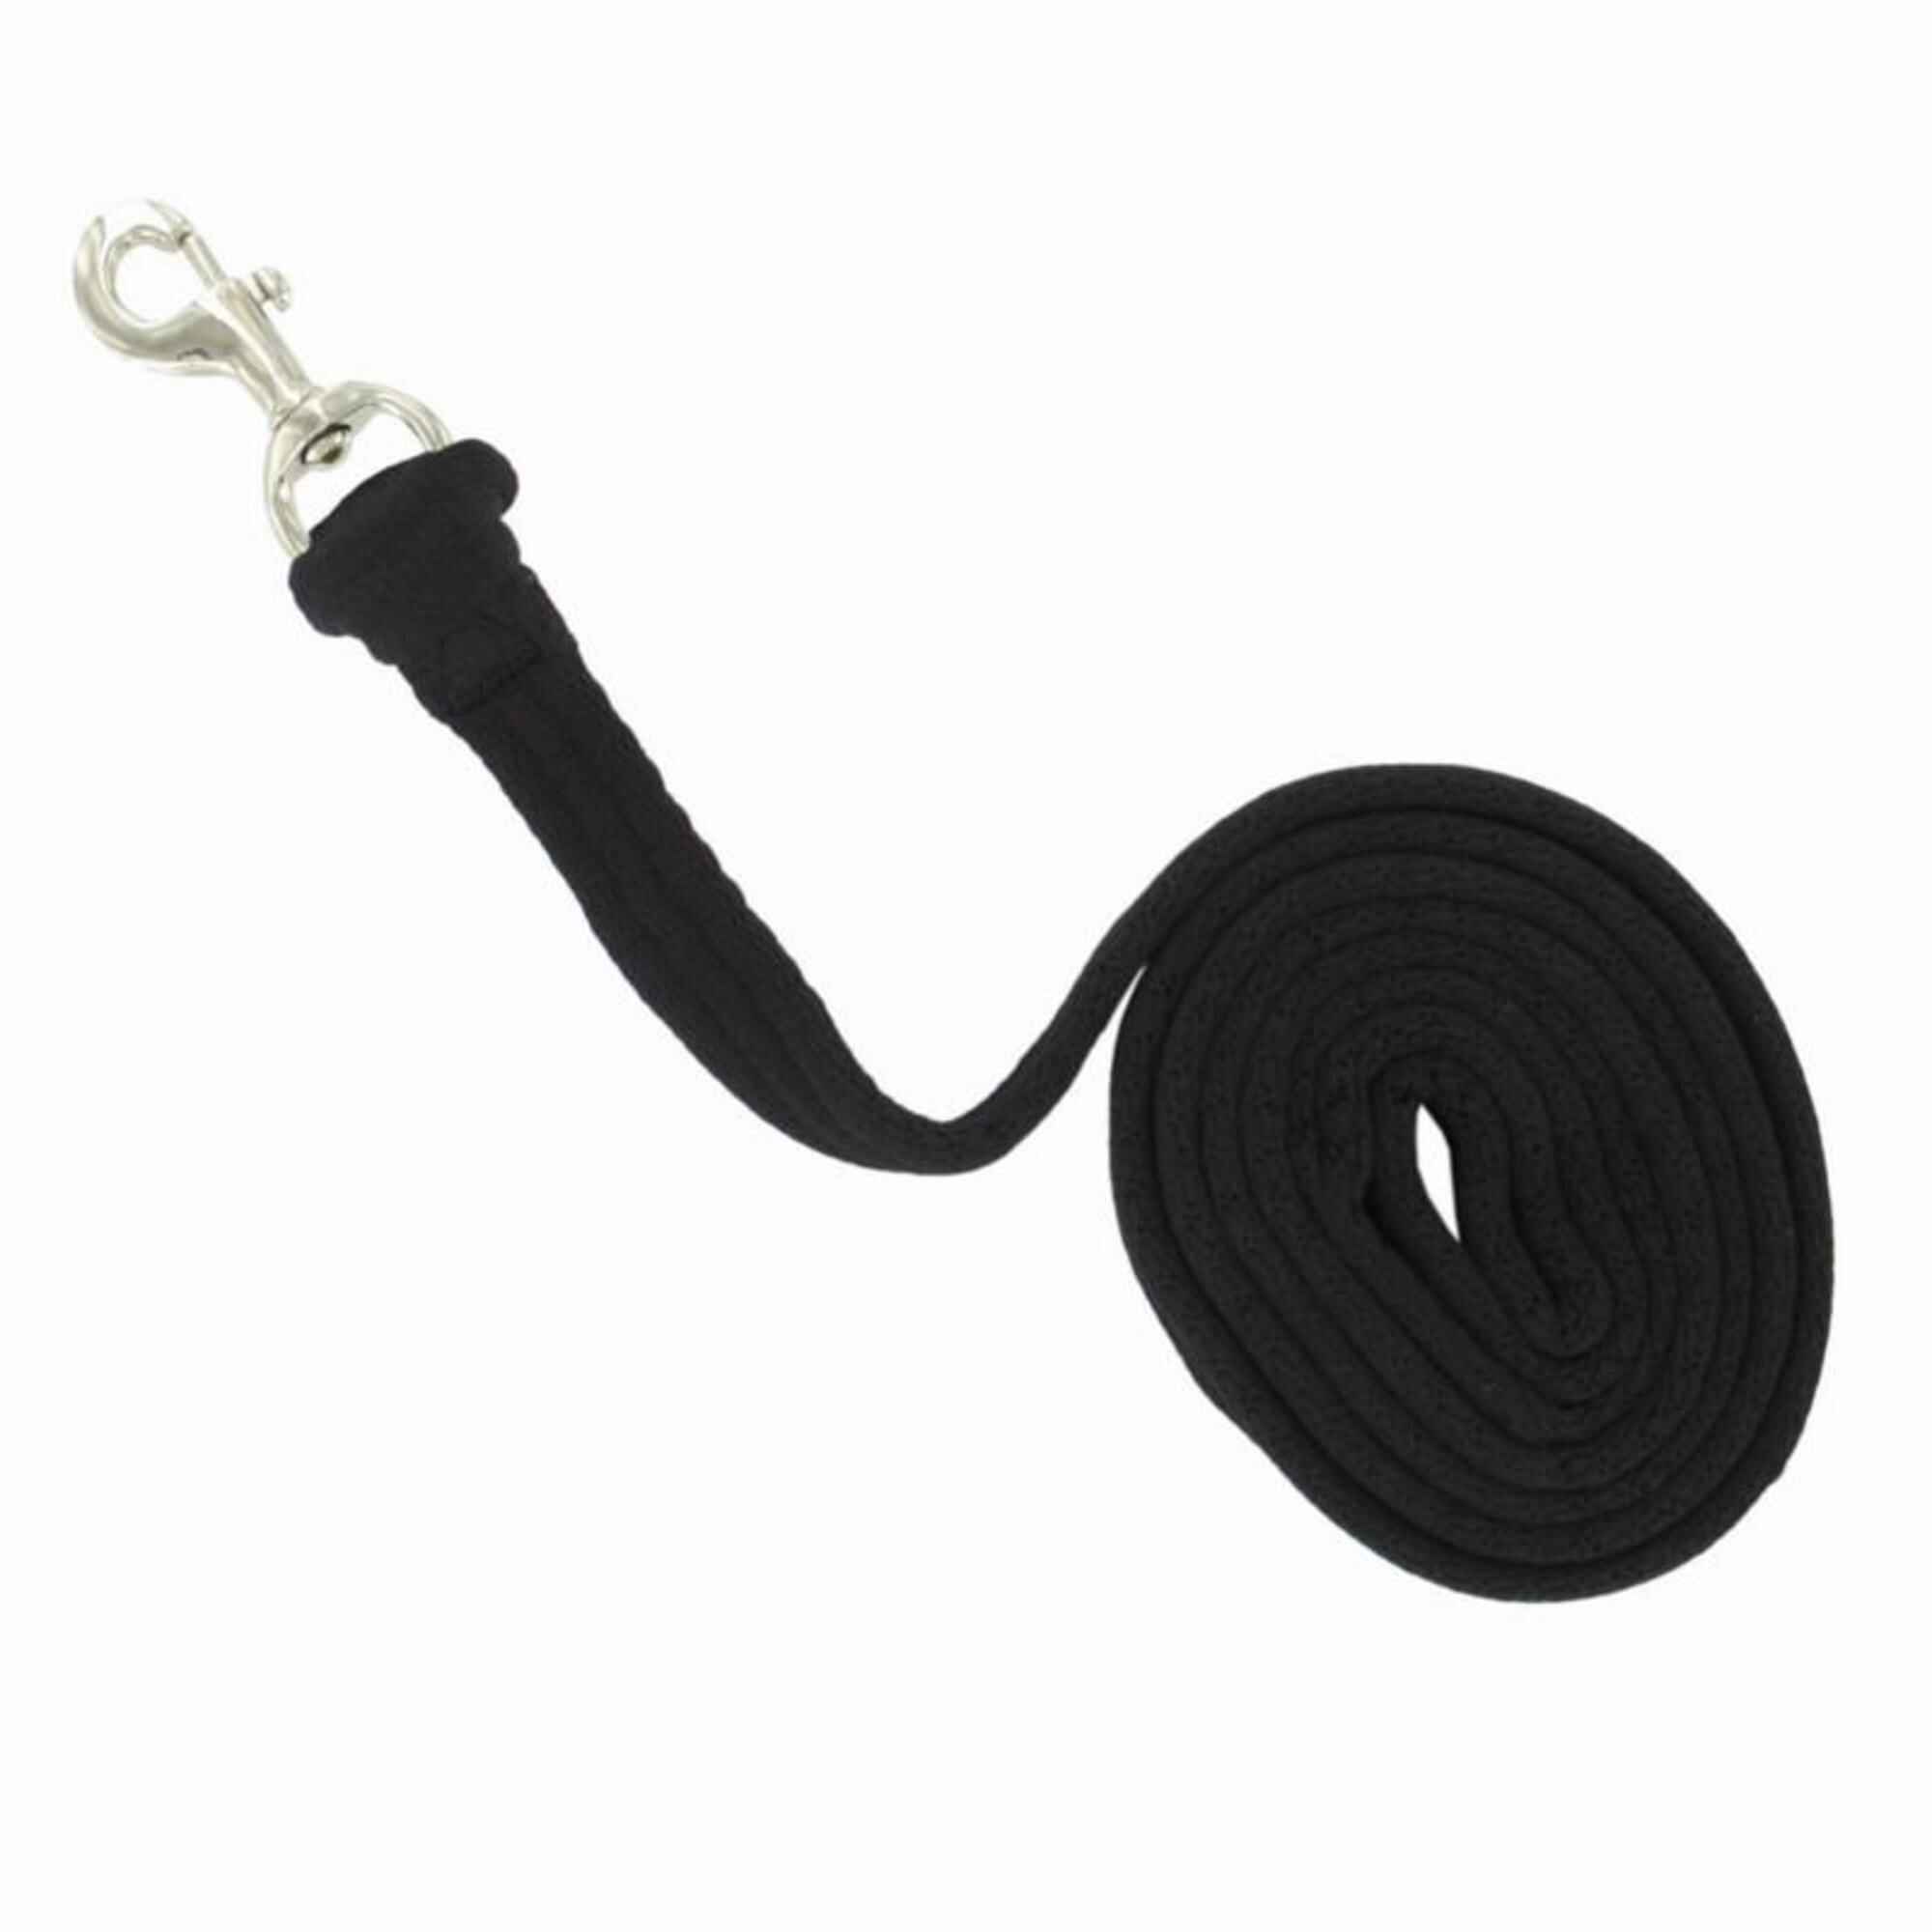 Soft Horse Riding 1.9m Leadrope for Horse and Pony - Black